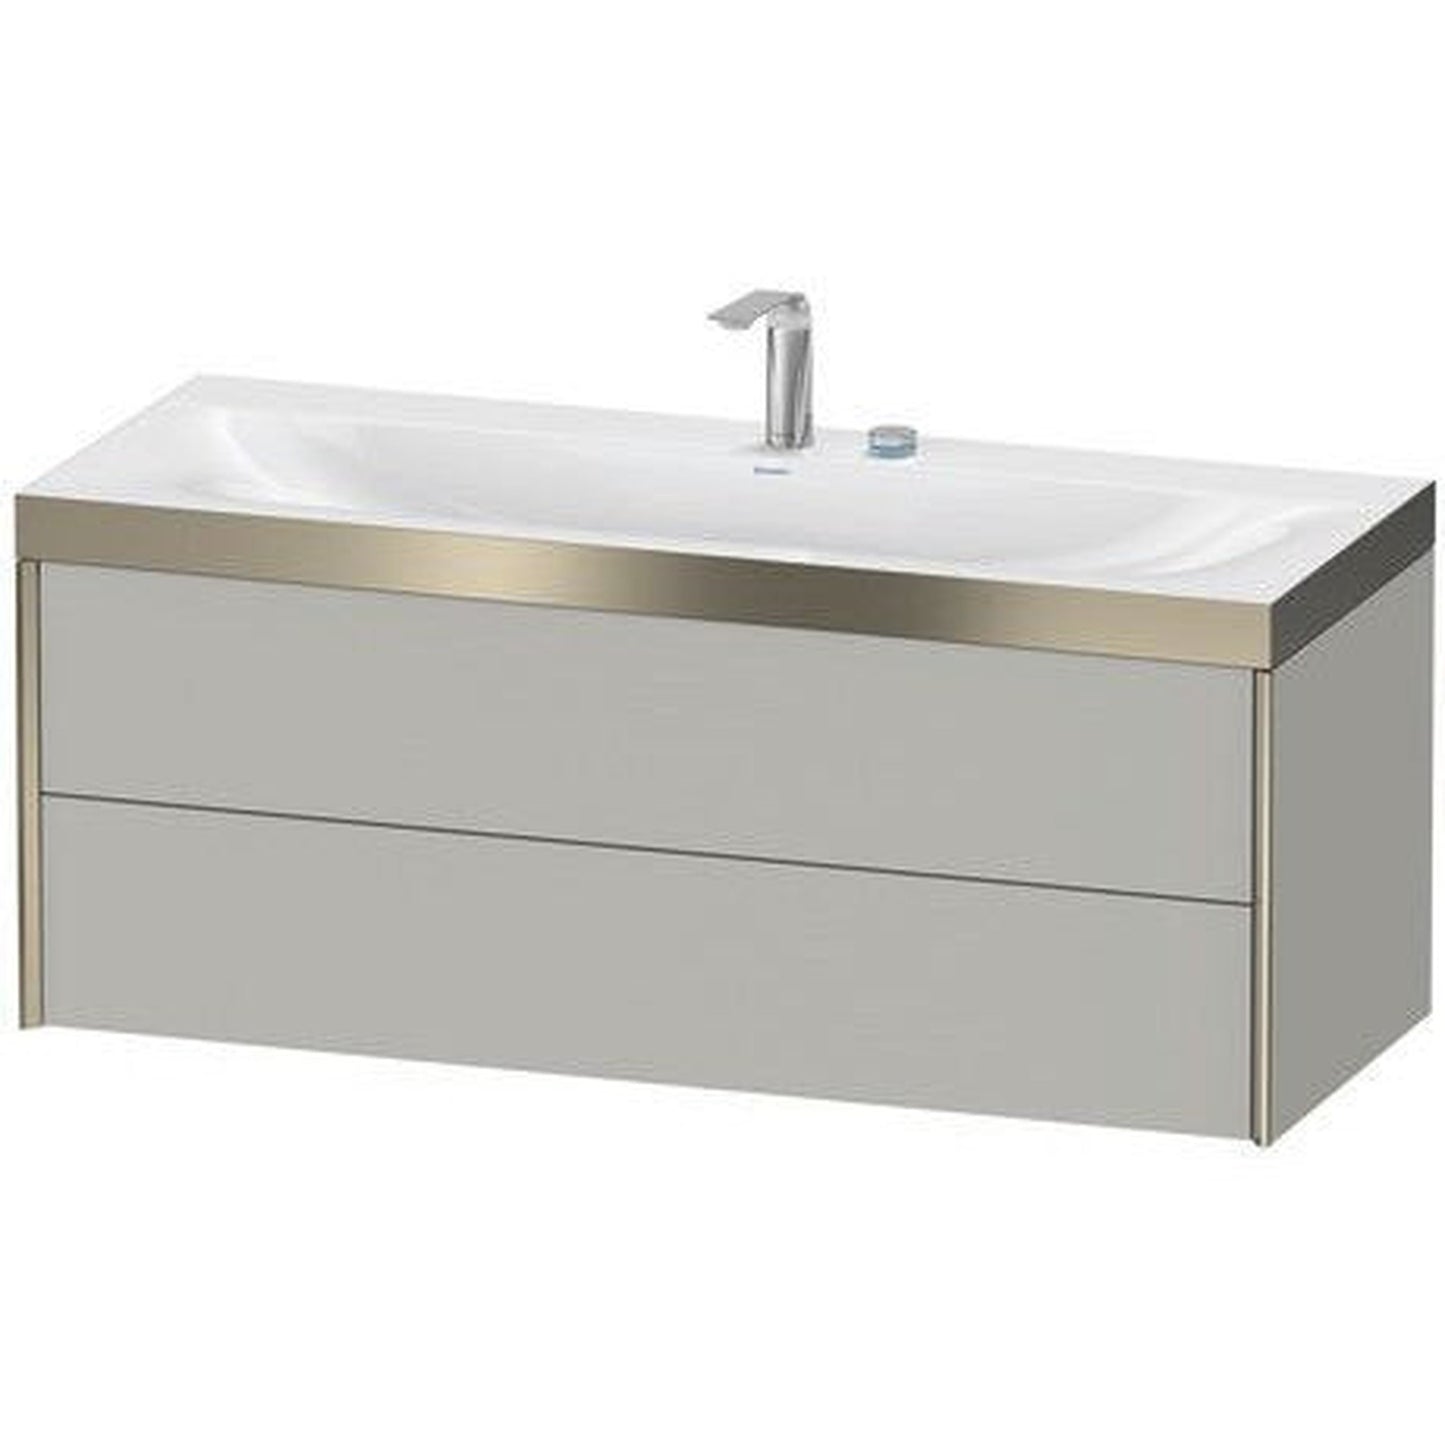 Duravit Xviu 47" x 20" x 19" Two Drawer C-Bonded Wall-Mount Vanity Kit With Two Tap Holes, Concrete Gray (XV4617EB107P)